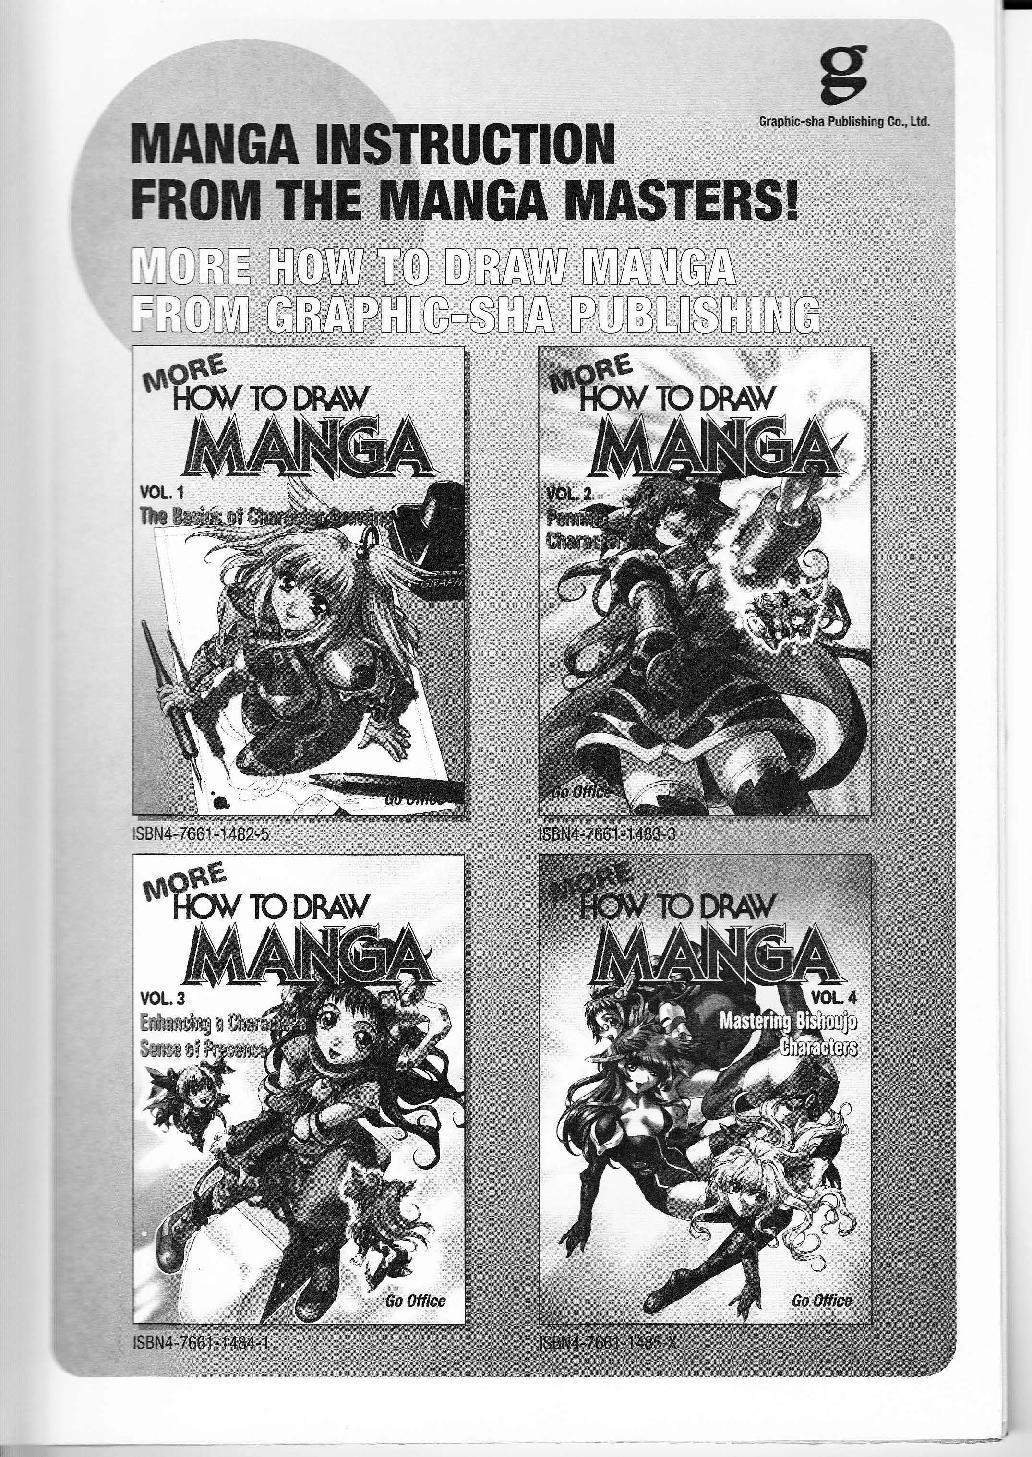 More How to Draw Manga Vol. 2 - Penning Characters 128